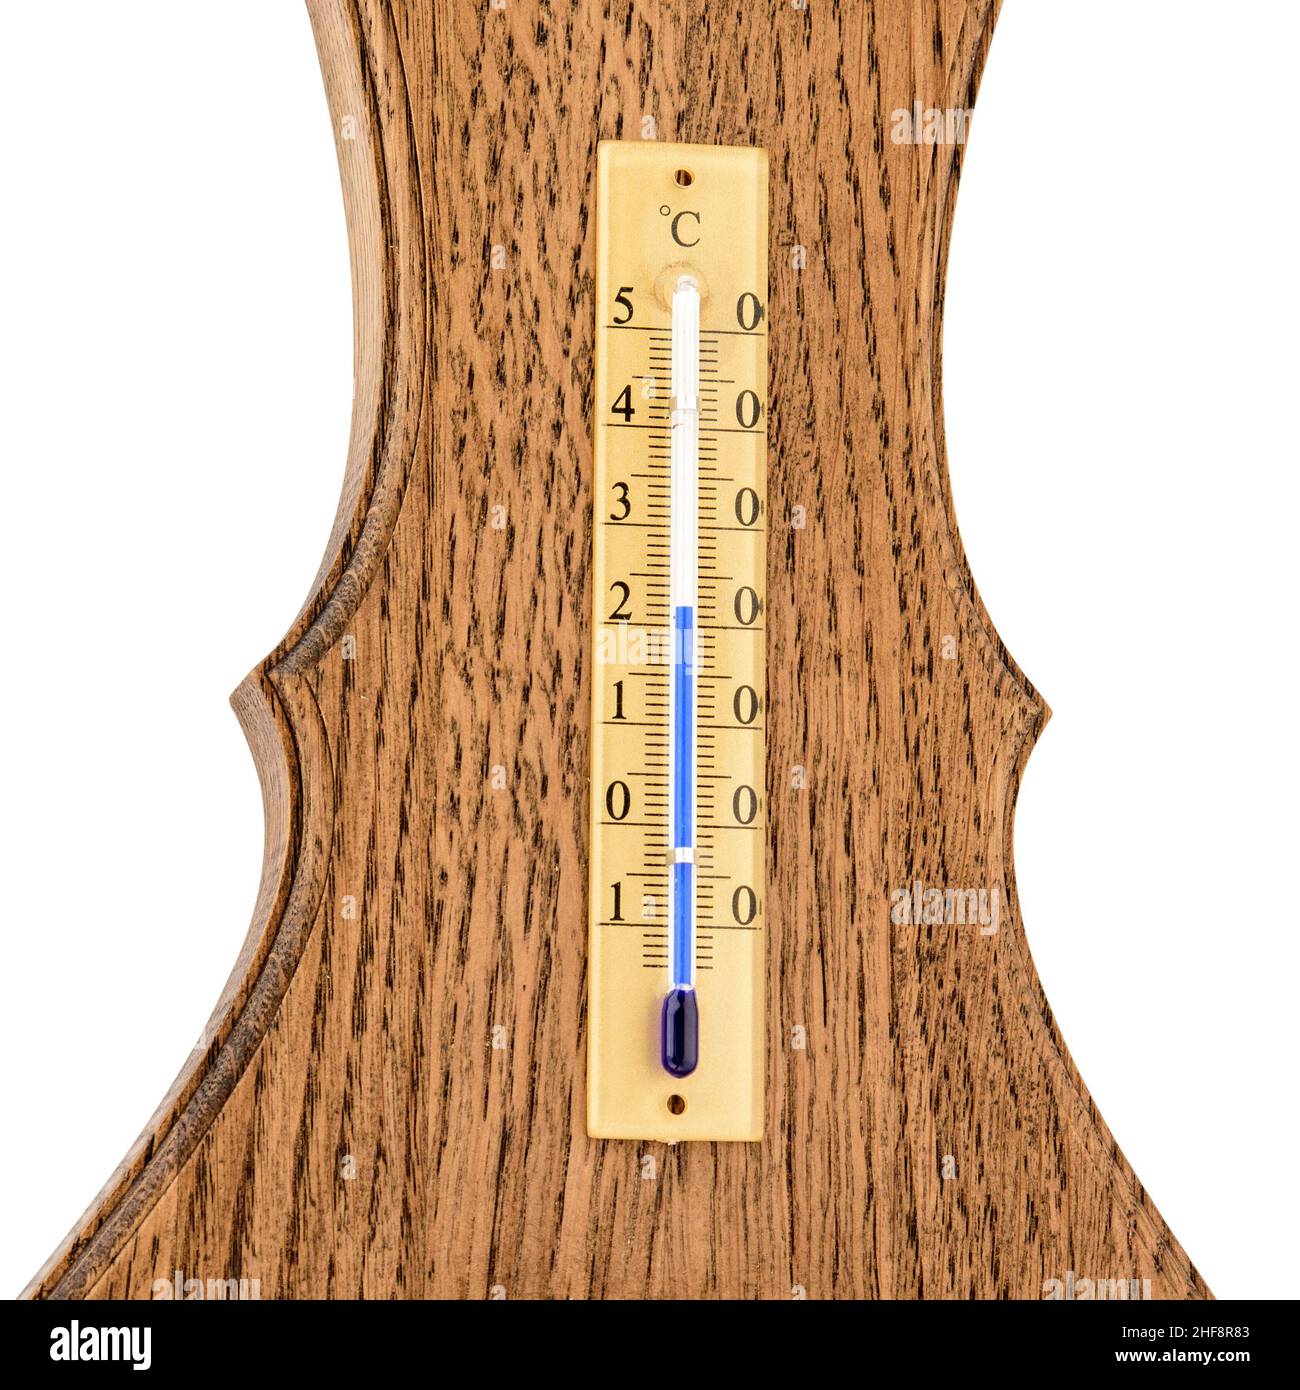 https://c8.alamy.com/comp/2HF8R83/old-style-thermometer-on-wood-texture-isolated-on-white-background-room-temperature-2HF8R83.jpg